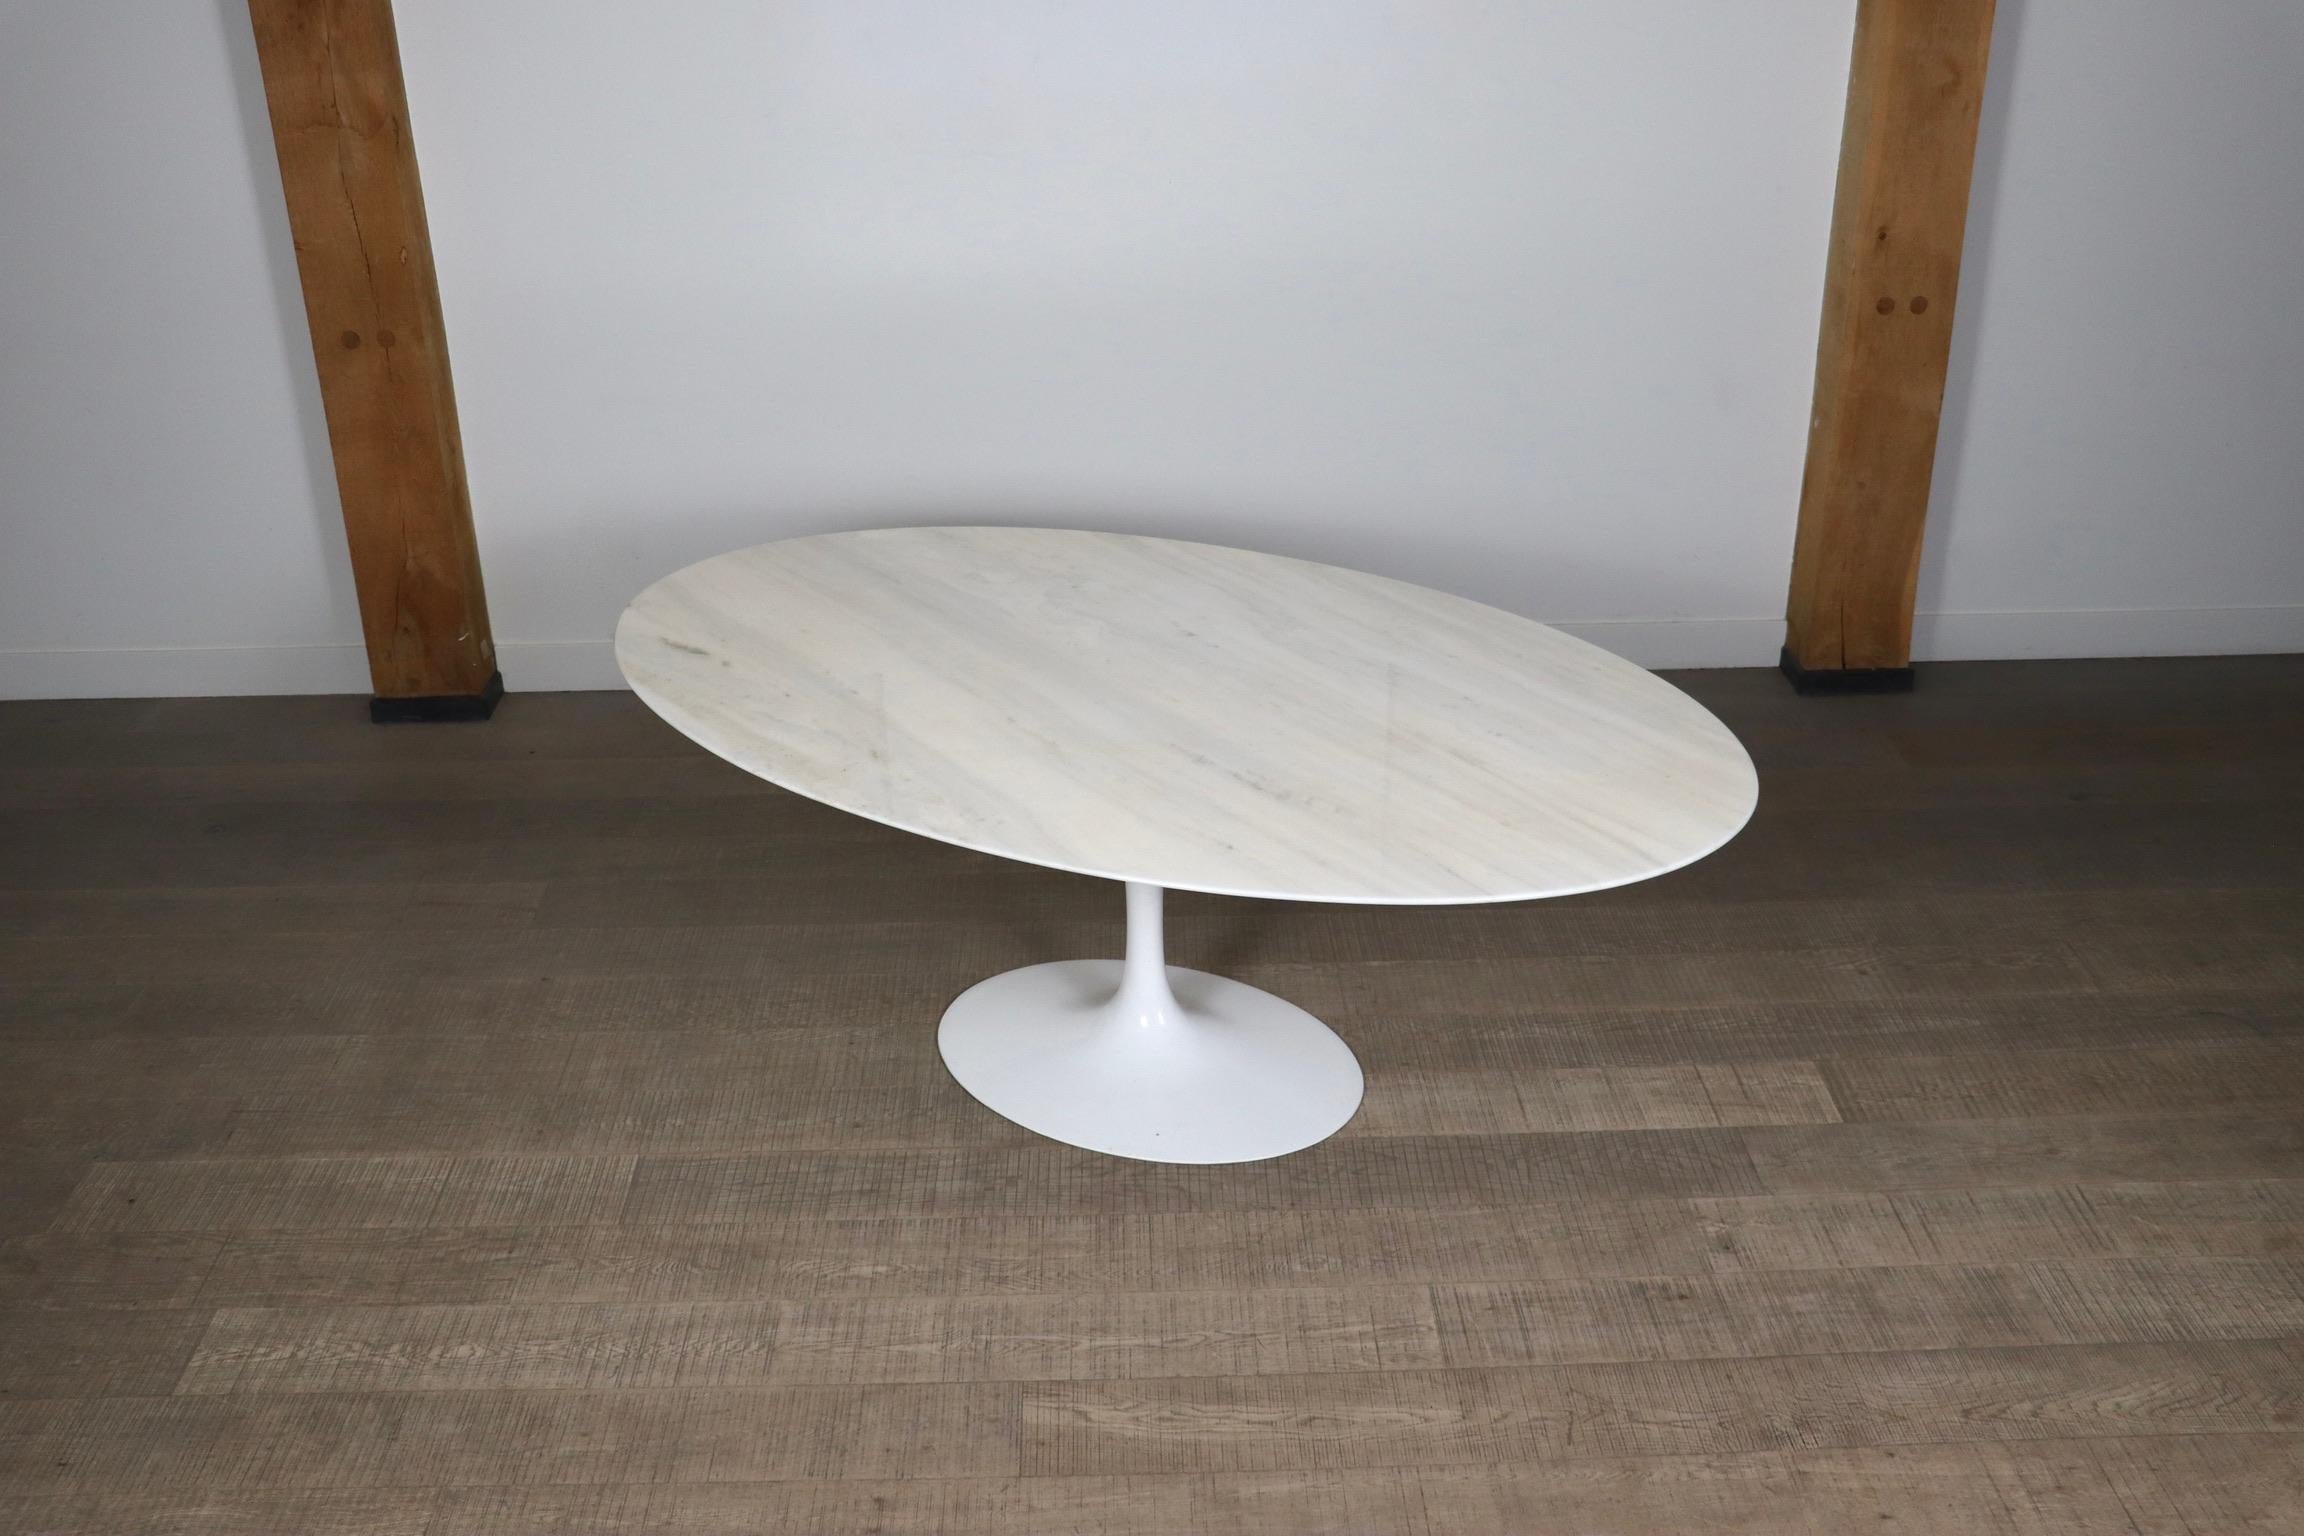 Nice oval shaped vintage white marble tulip dining table, designed by Eero Saarinen for Knoll International. This timeless design will instantly elevate any dining area with its luxurious looks and feeling. The beautiful calm grains of the white